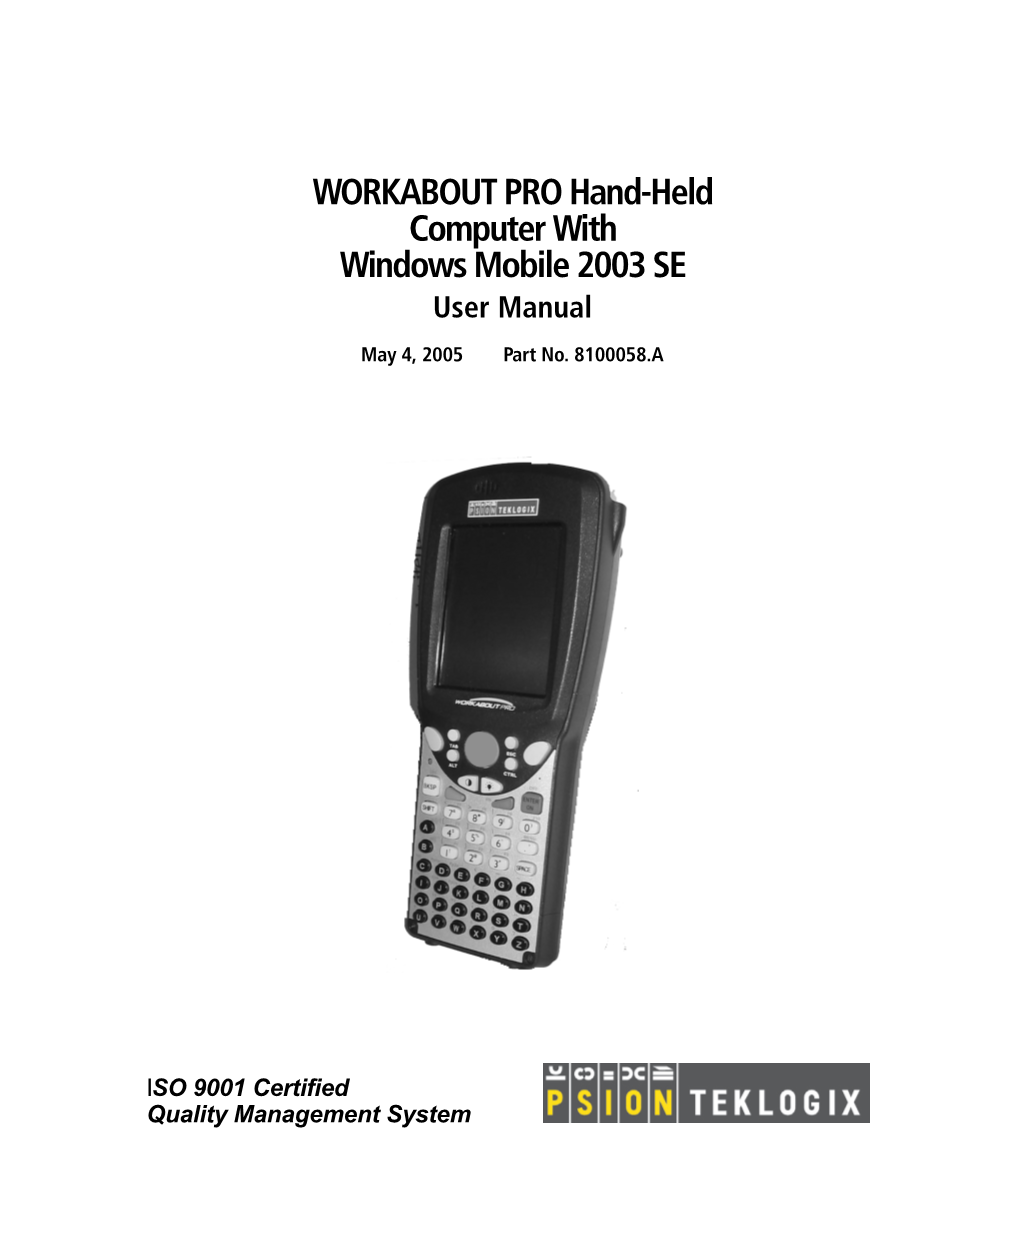 WORKABOUT PRO Hand-Held Computer with Windows Mobile 2003 SE User Manual